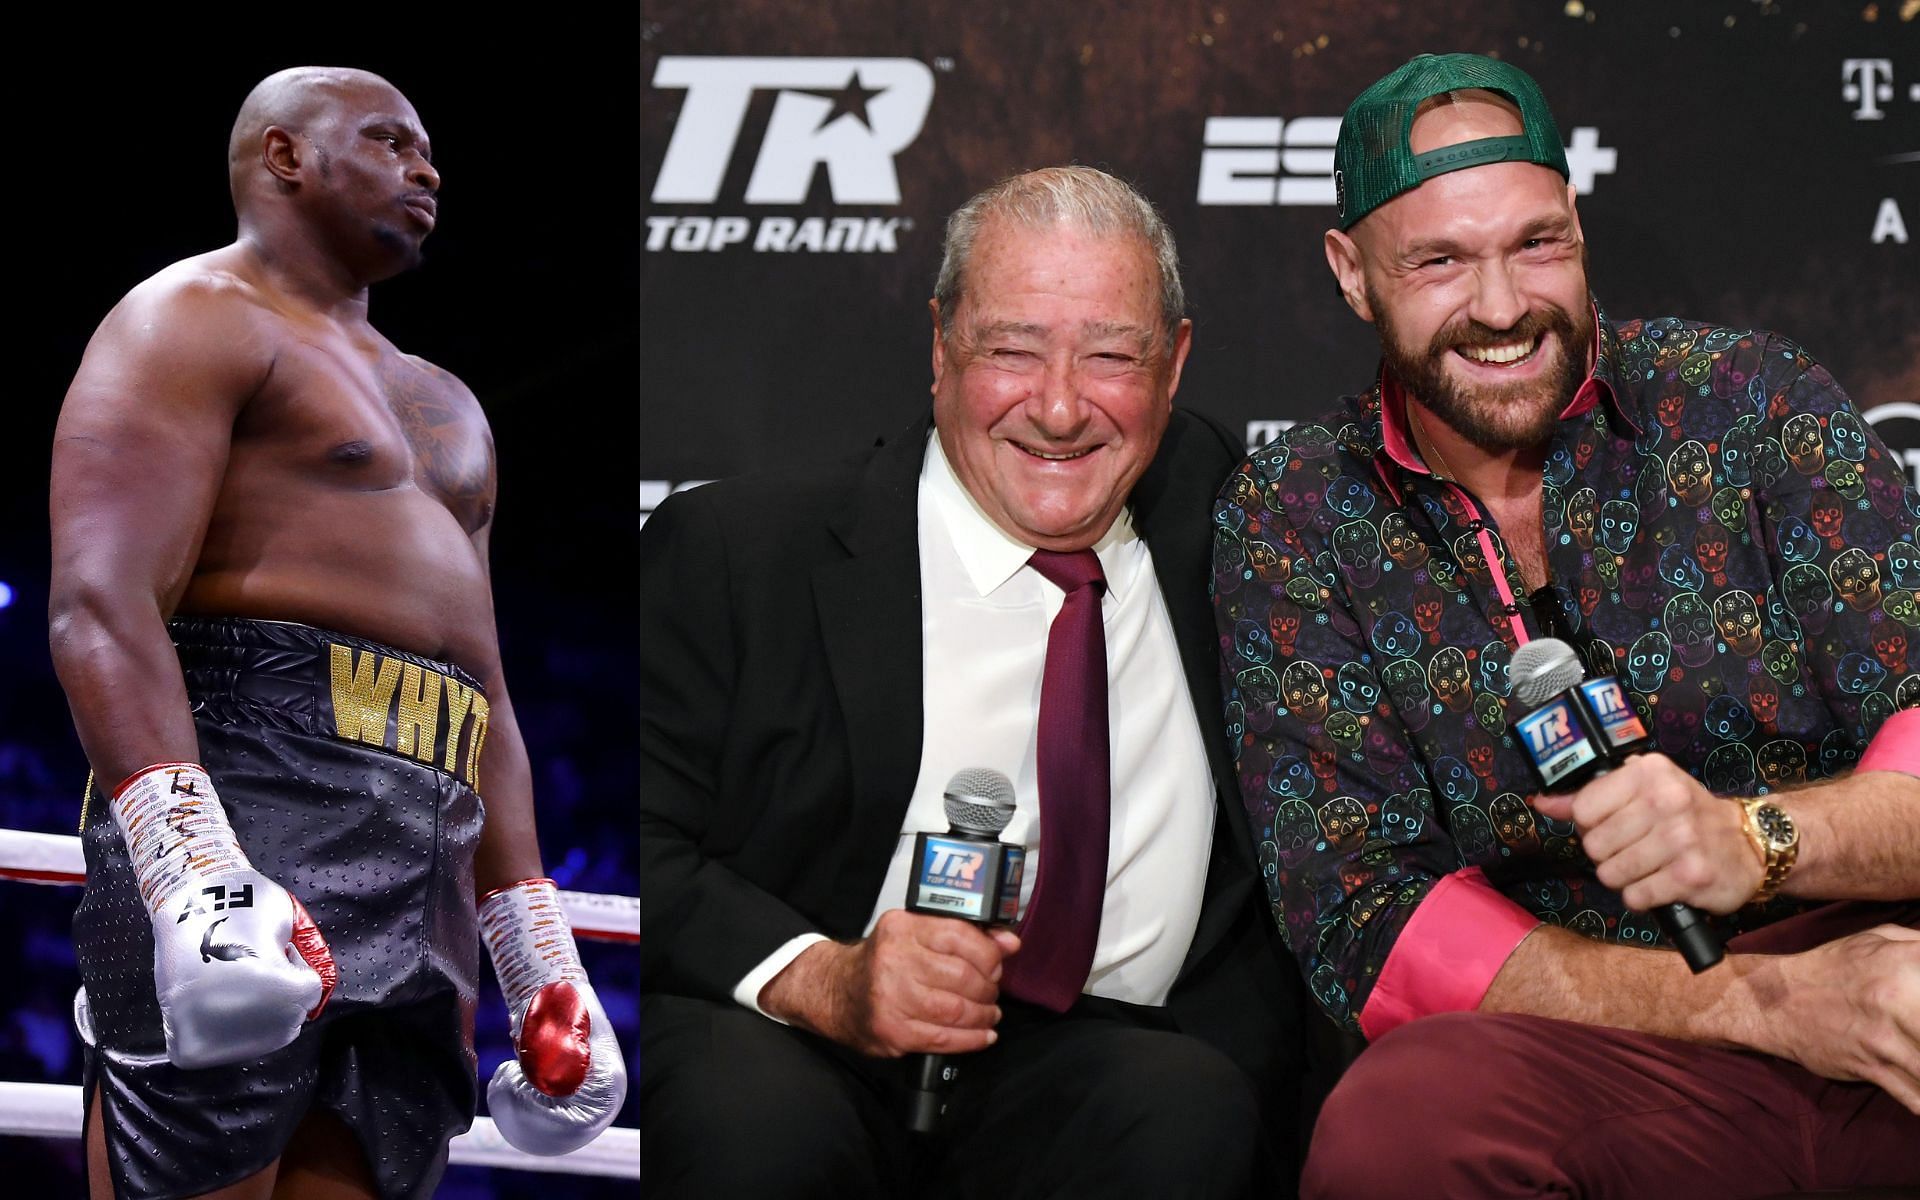 Dillian Whyte (left) and Bob Arum (center) with Tyson Fury (right) at an event